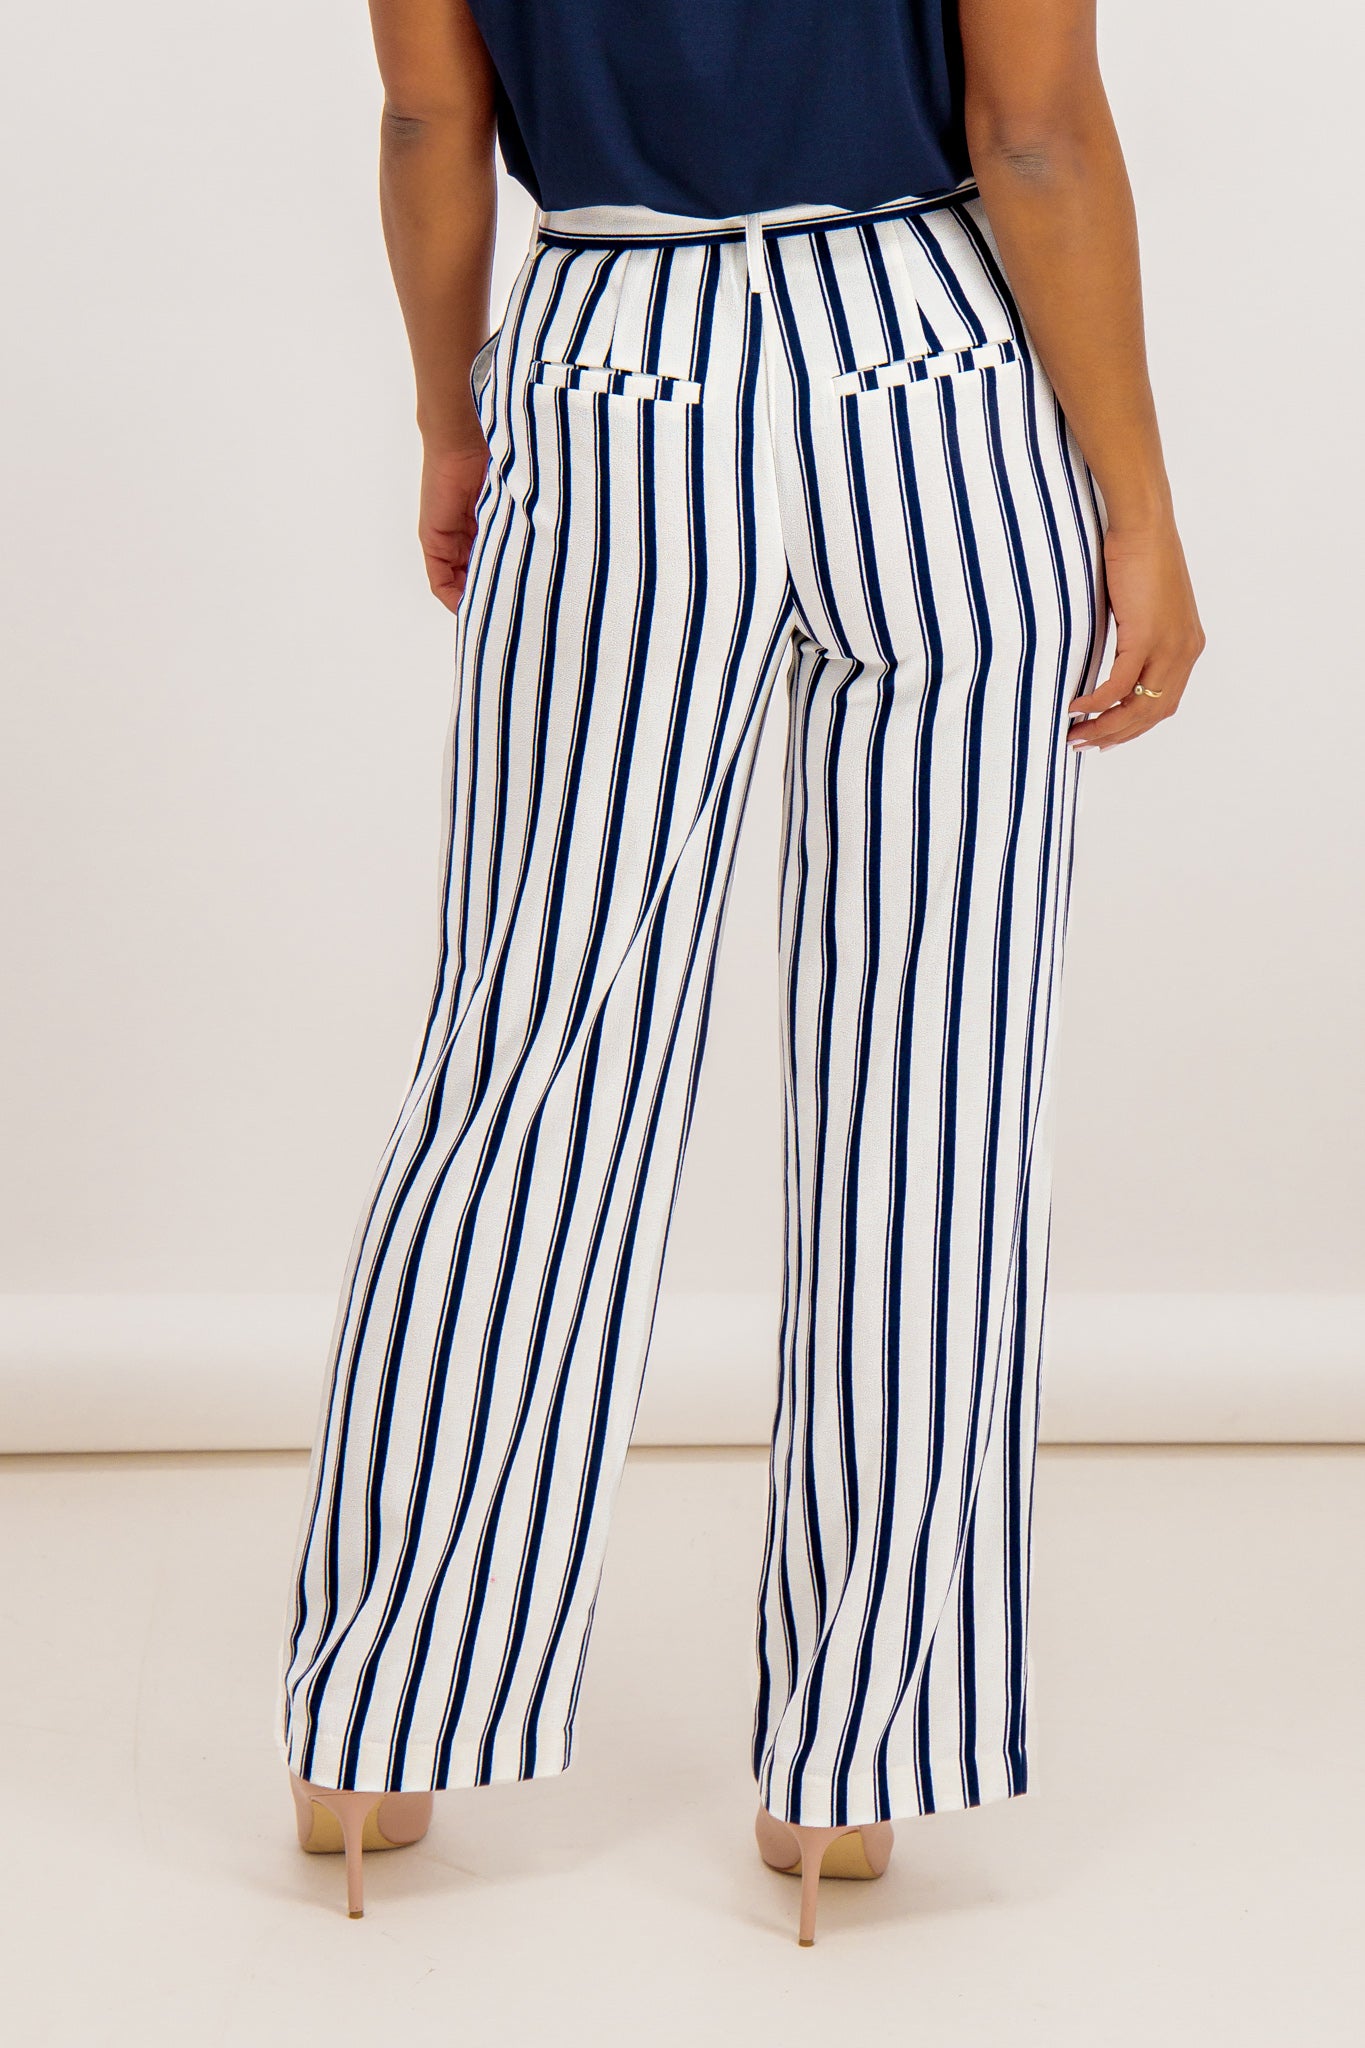 Striped Linen Trousers for Women, Blue & White Stripy Patterned Elasticated  Waist Linen Pants With Wide-leg, Ladies Summer Linen Clothing -  Canada